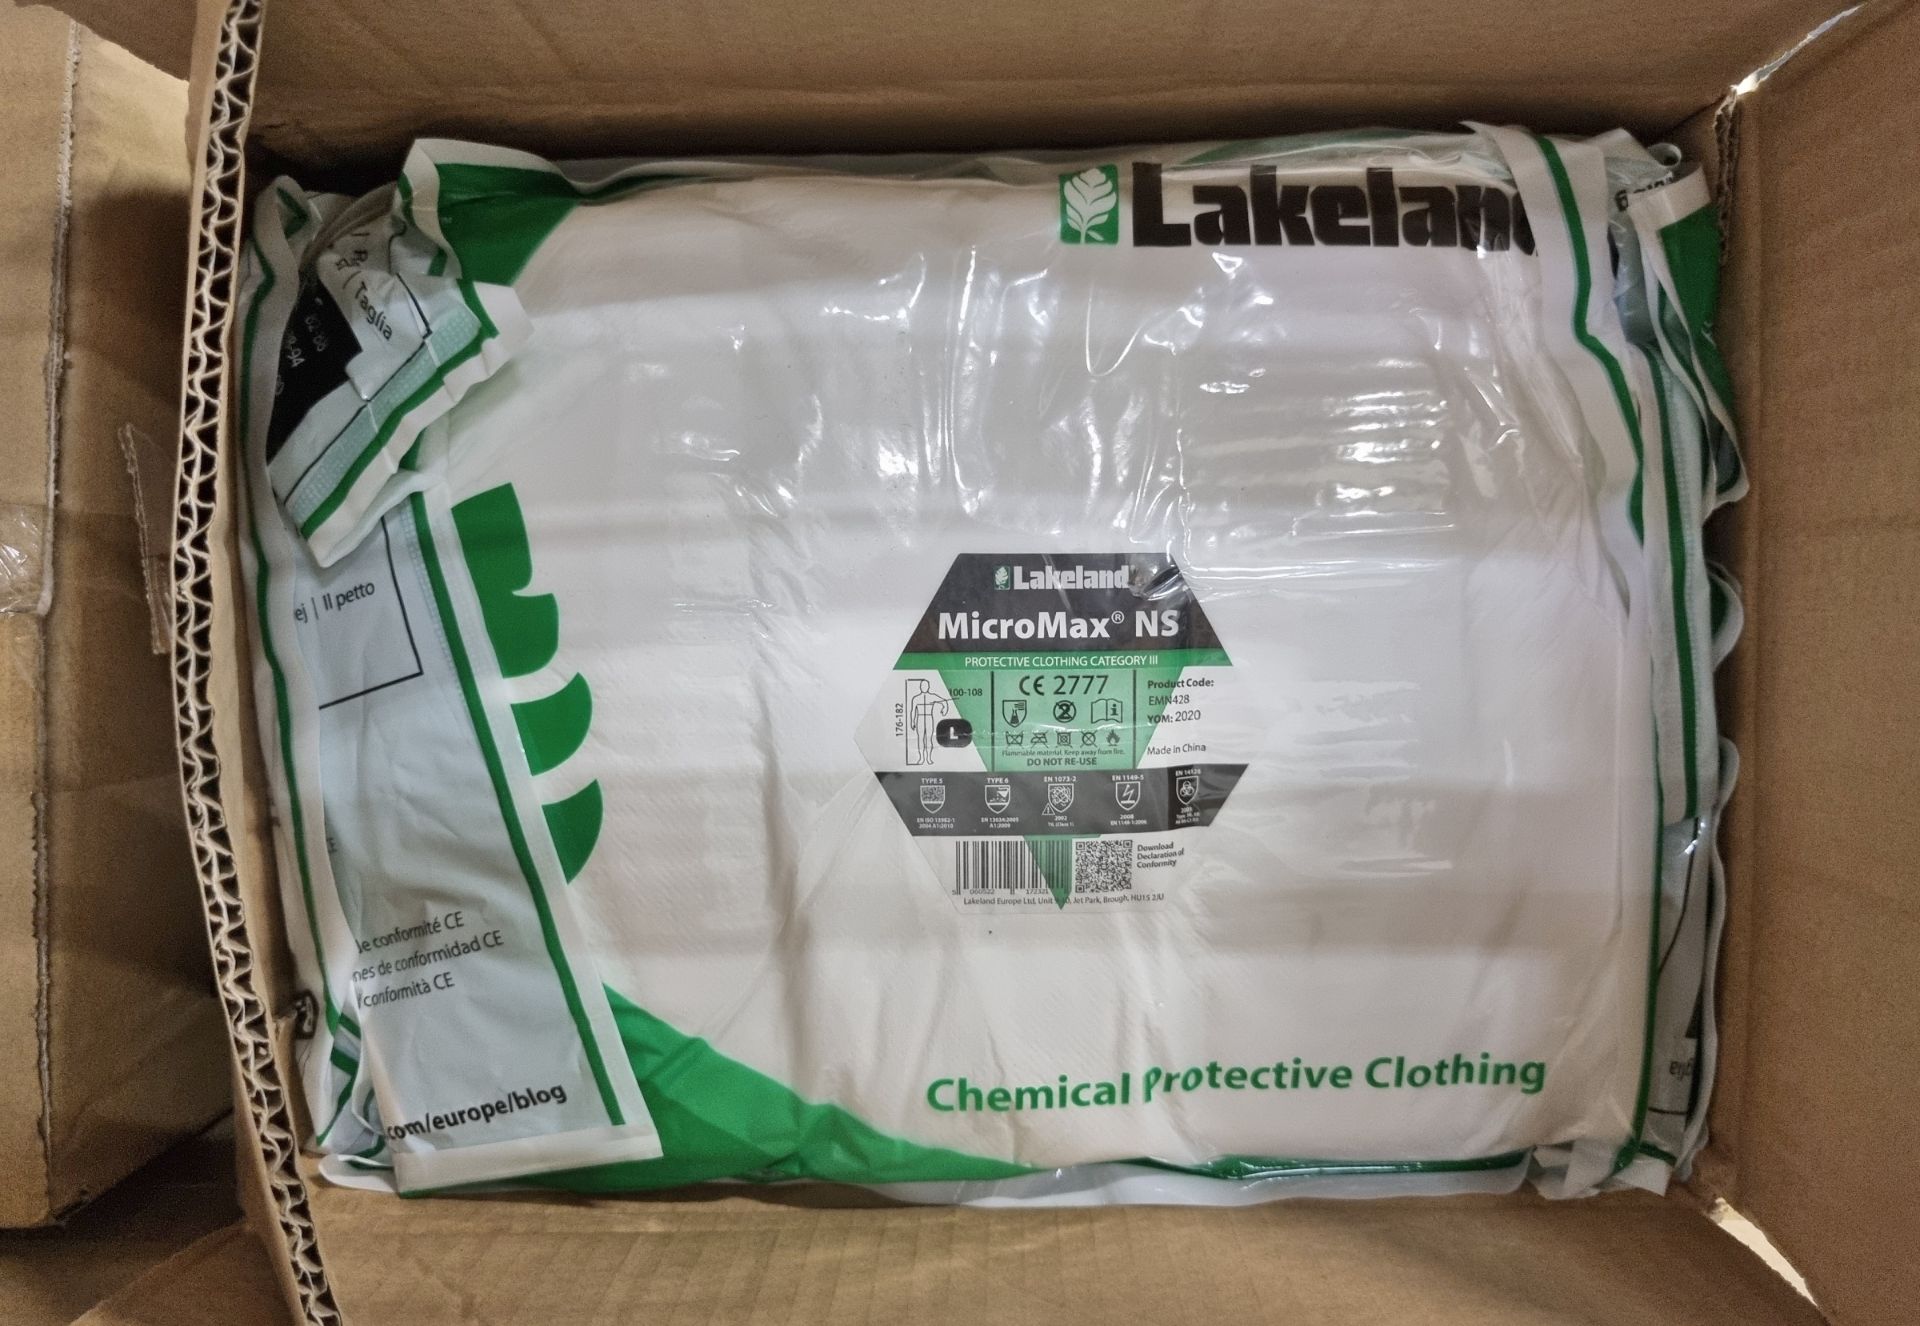 11x boxes of Lakeland MicroMax NS protective clothing coveralls with hood - 25 units per box - Image 5 of 6